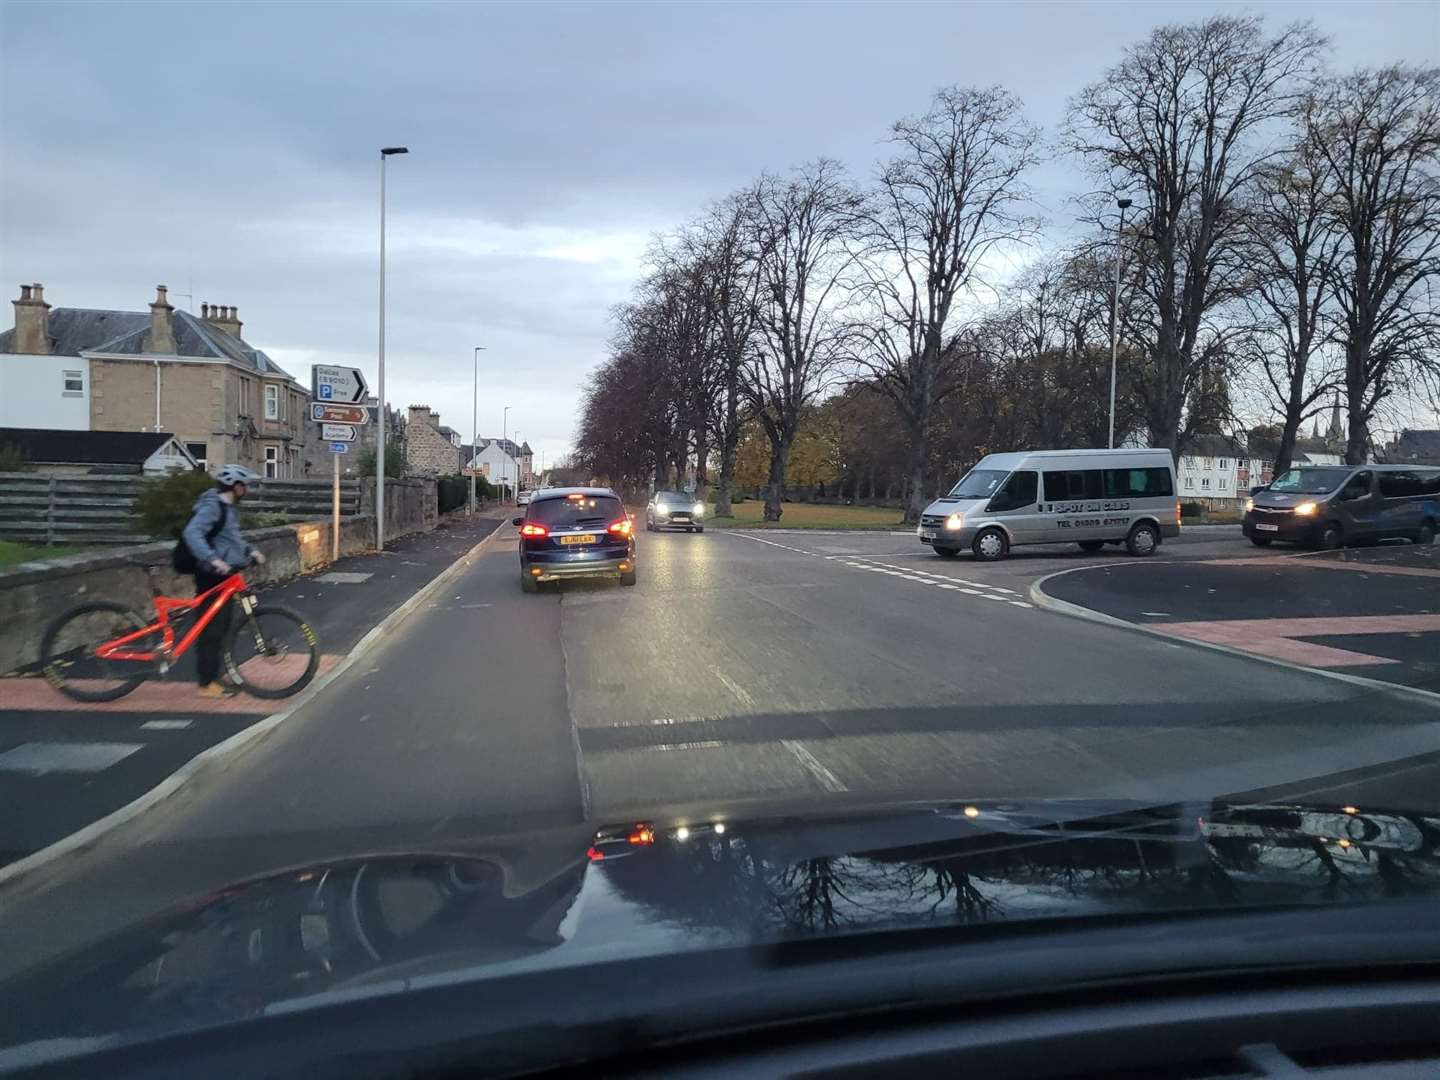 The junction of St Catherine's Road and Orchard Road in Forres has been earmarked for traffic lights.